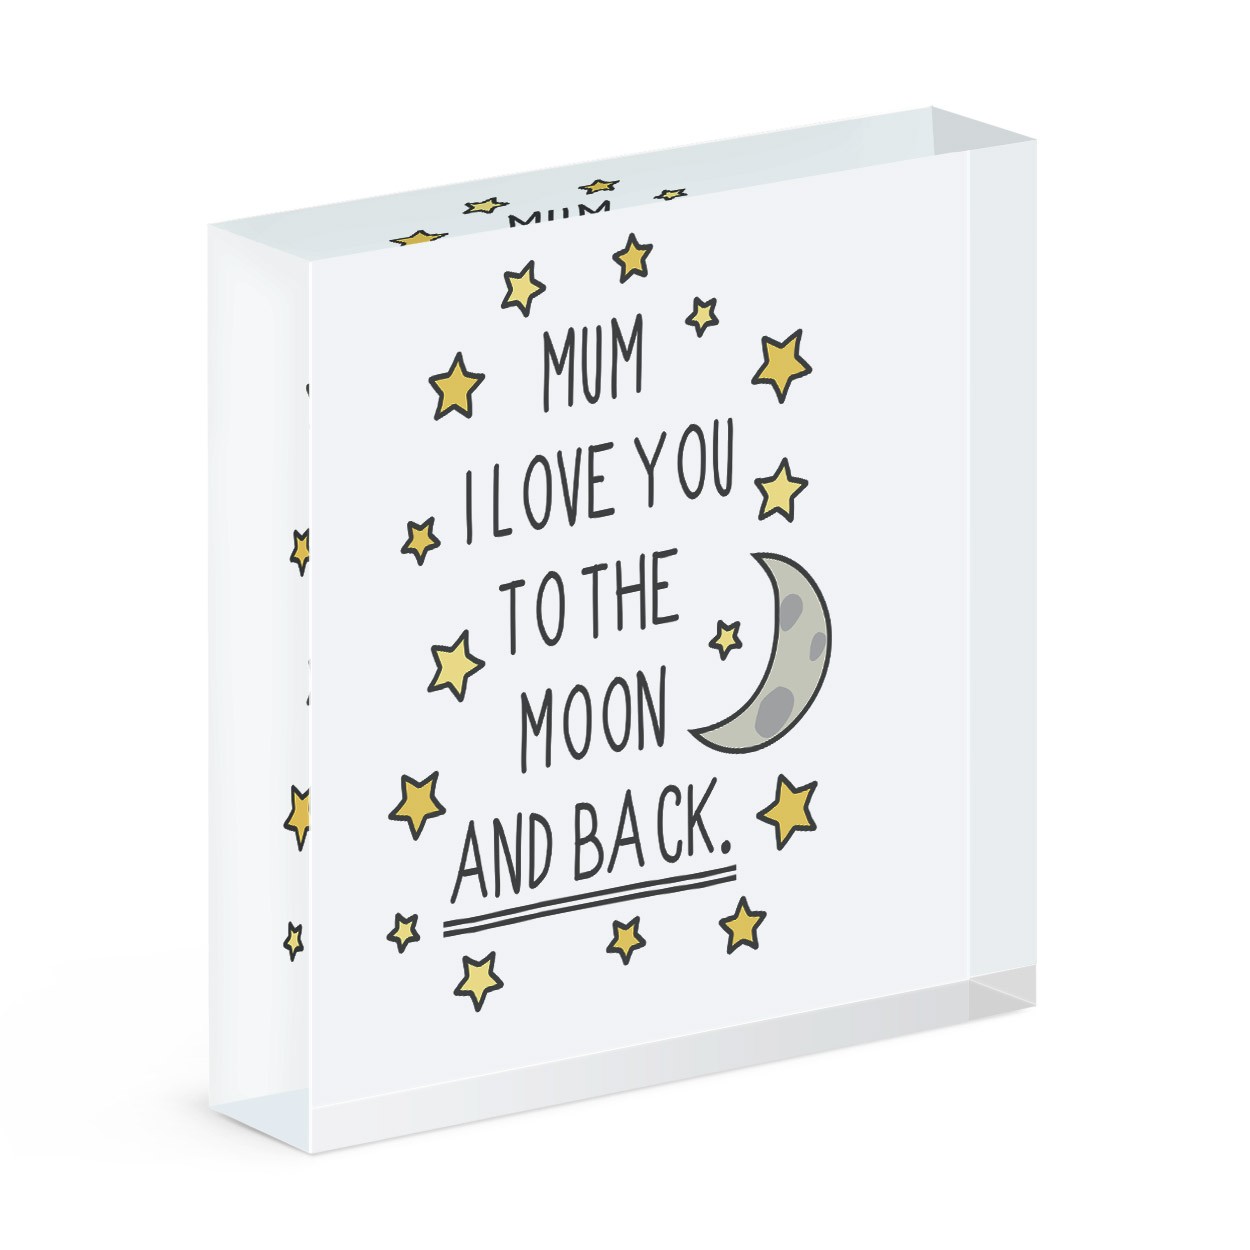 Mum I Love You To The Moon And Back Acrylic Block